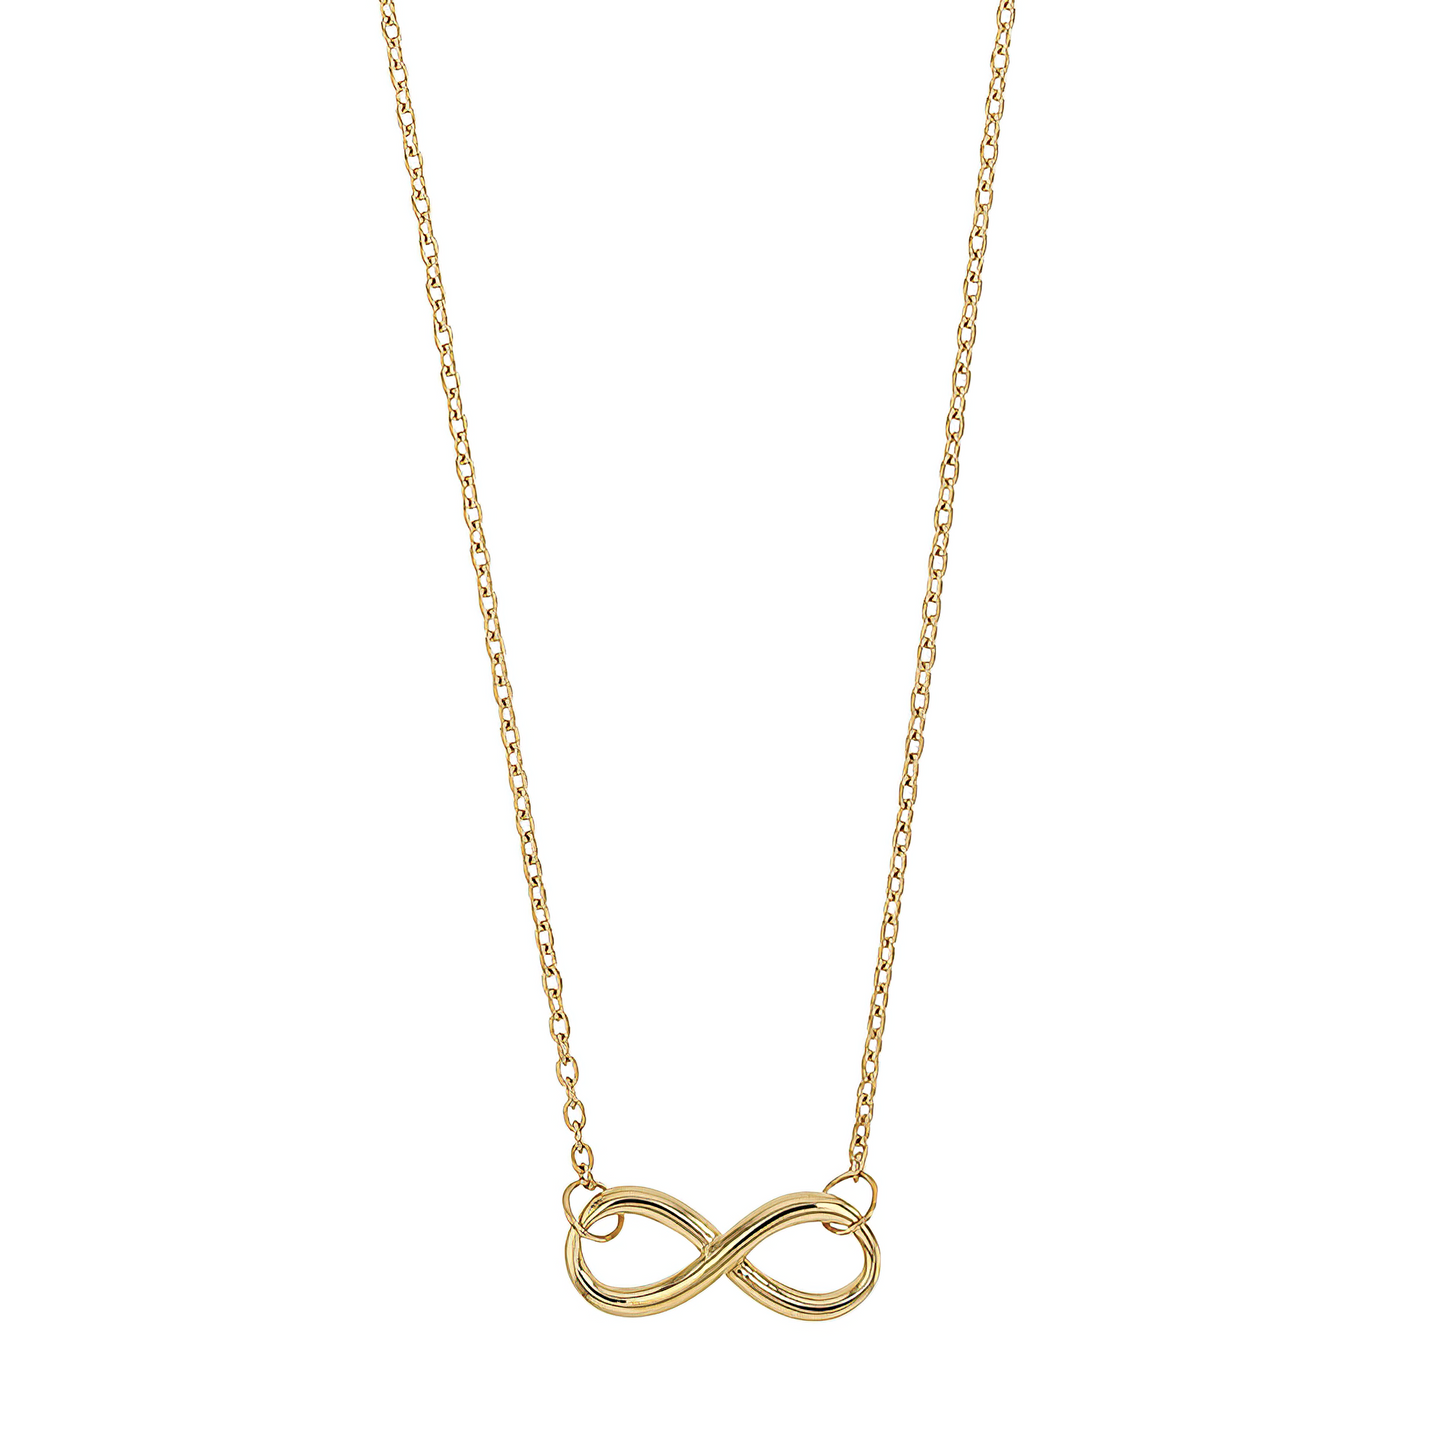 9 carat gold infinity necklace